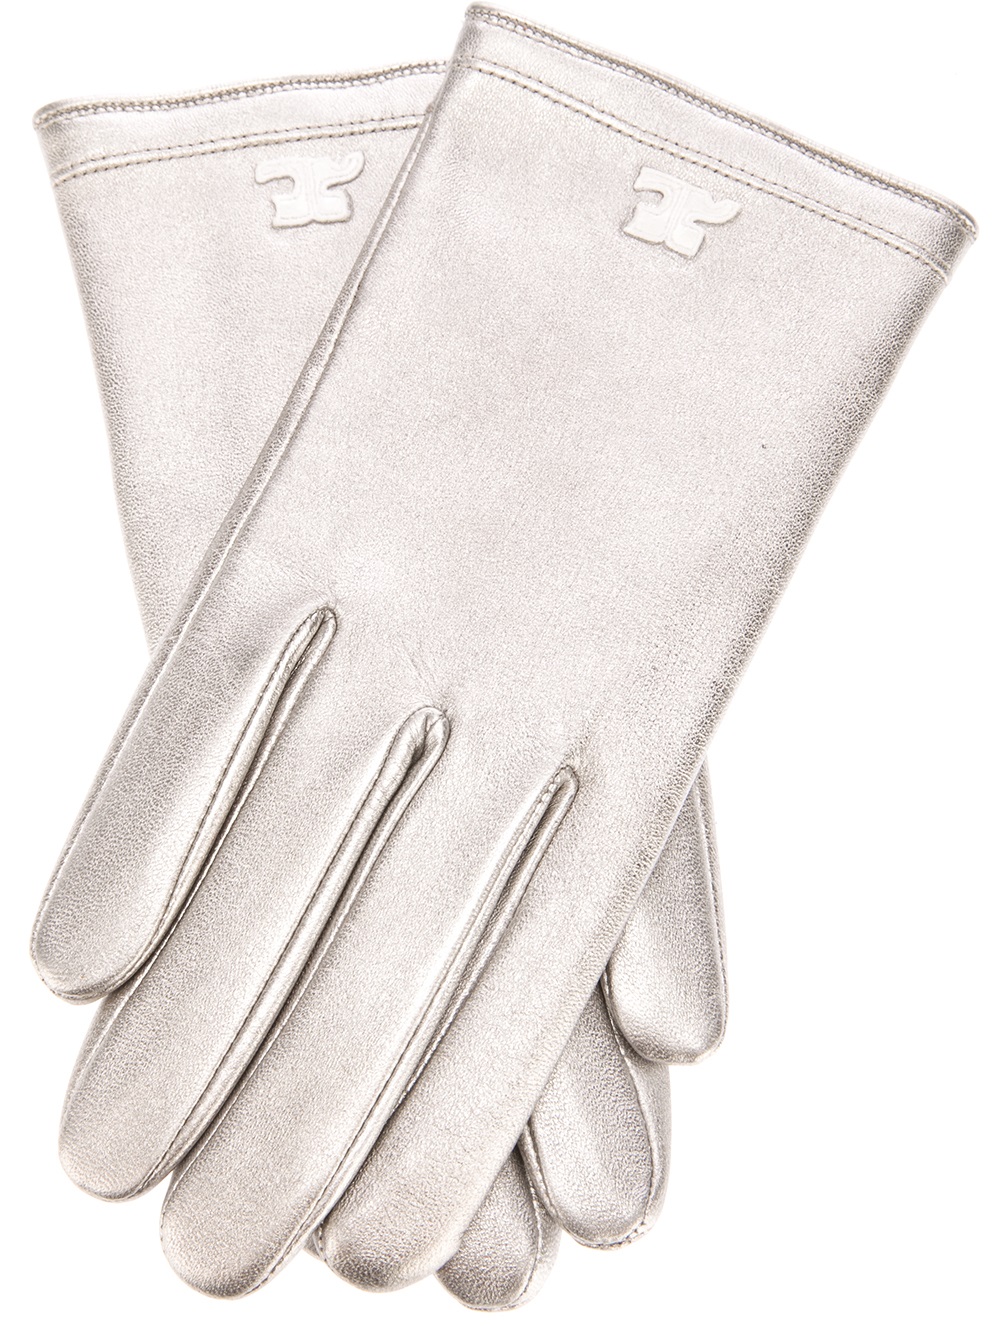 Courreges Leather Gloves in Grey (White) - Lyst